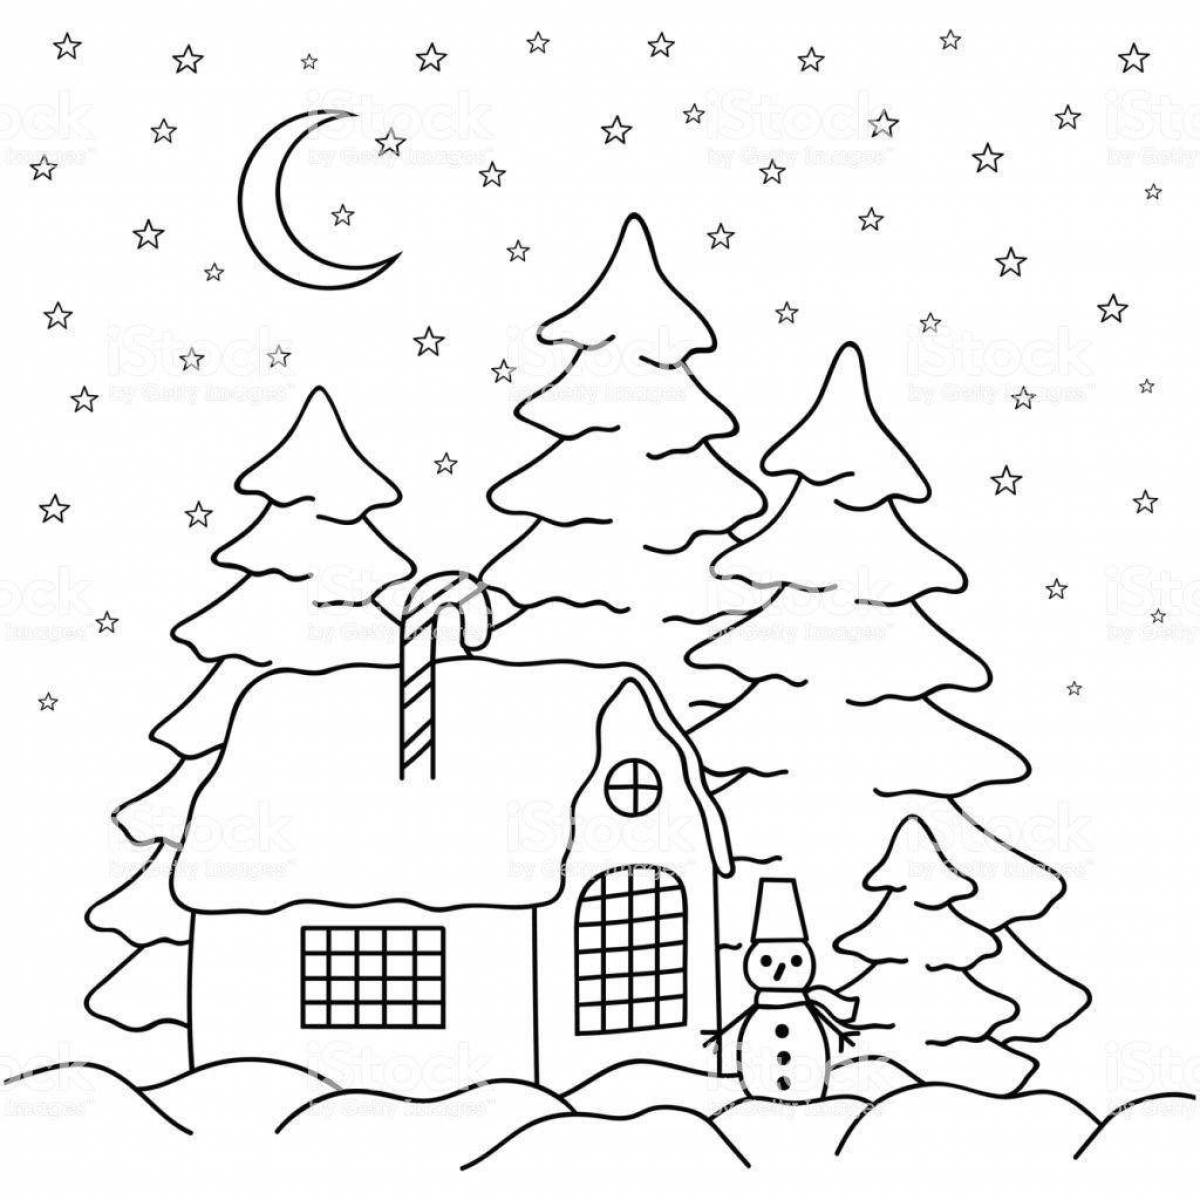 Exquisite winter beauty coloring book